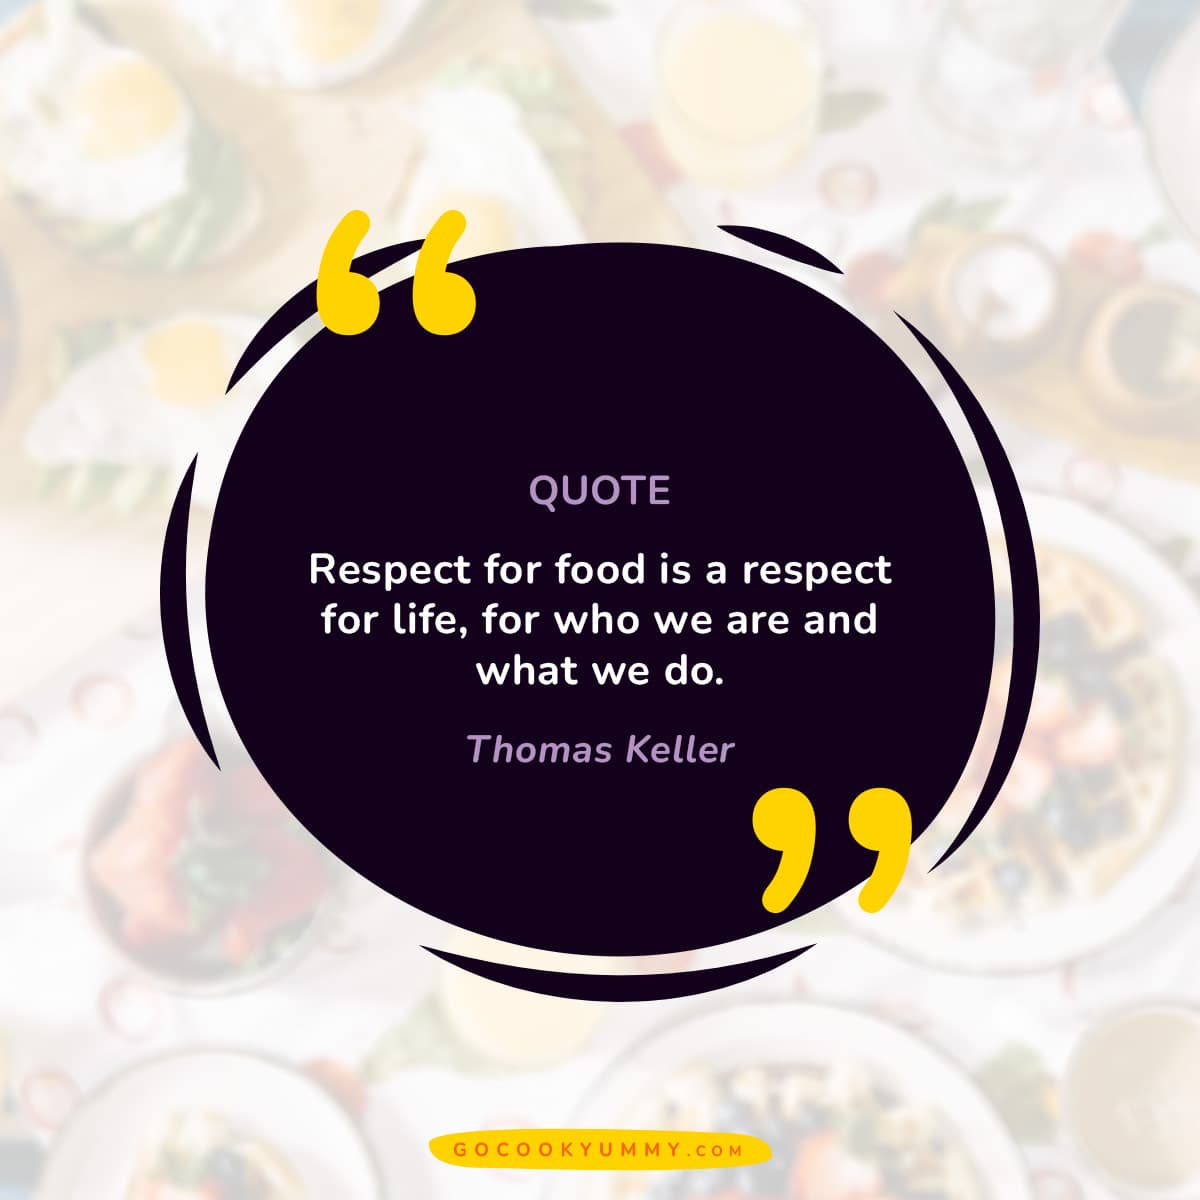 Respect for food is a respect for life, for who we are and what we do.